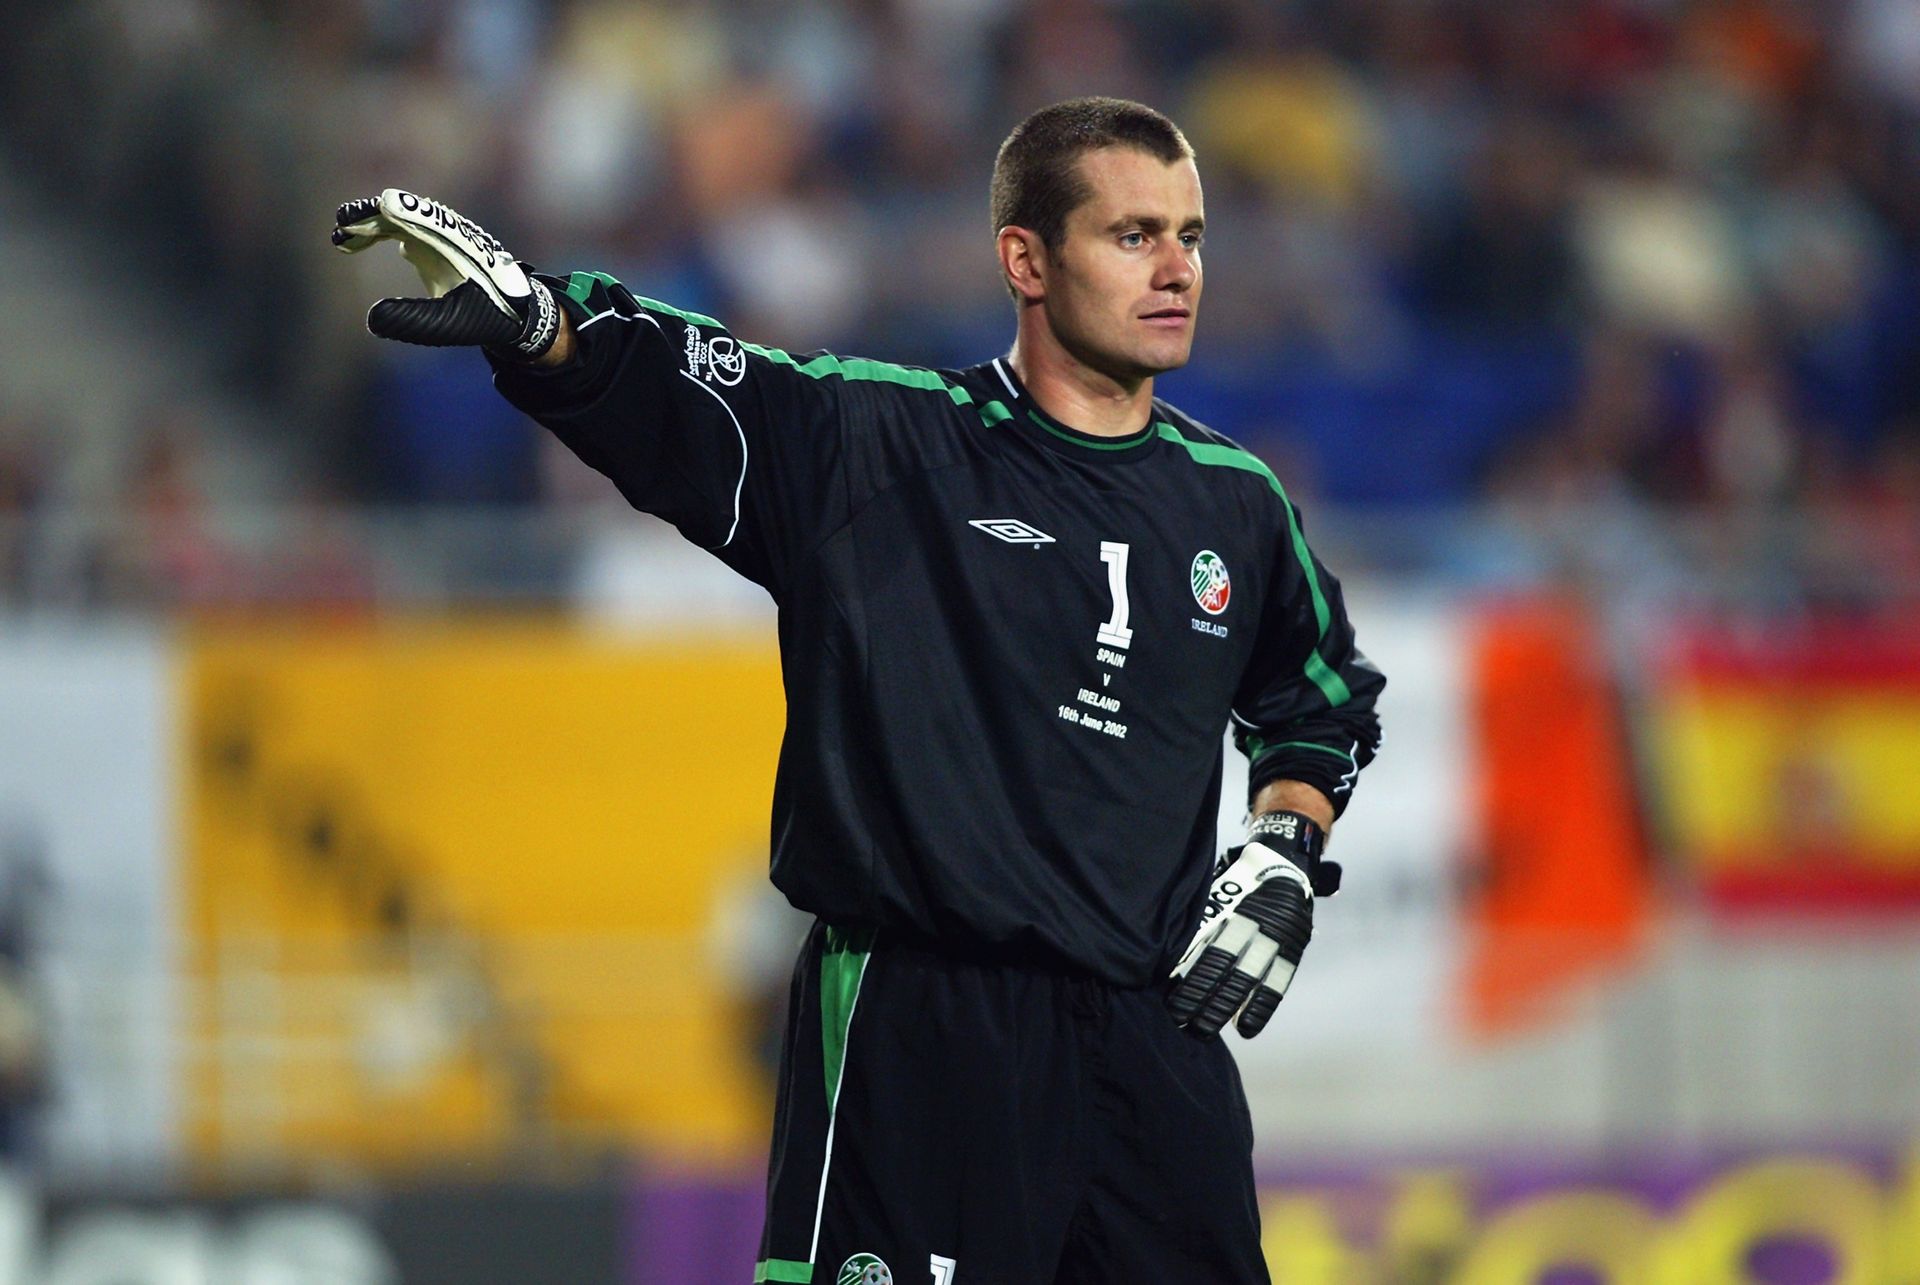 <p>                     Shay Given won 134 caps for the Republic of Ireland in a 20-year international career and is considered one of the greatest goalkeepers in the nation's history.                   </p>                                      <p>                     An agile, athletic goalkeeper with quick reflexes and good anticipation, Given is best known at club level for his spell at Newcastle United, where he made over 450 appearances between 1997 and 2009.                   </p>